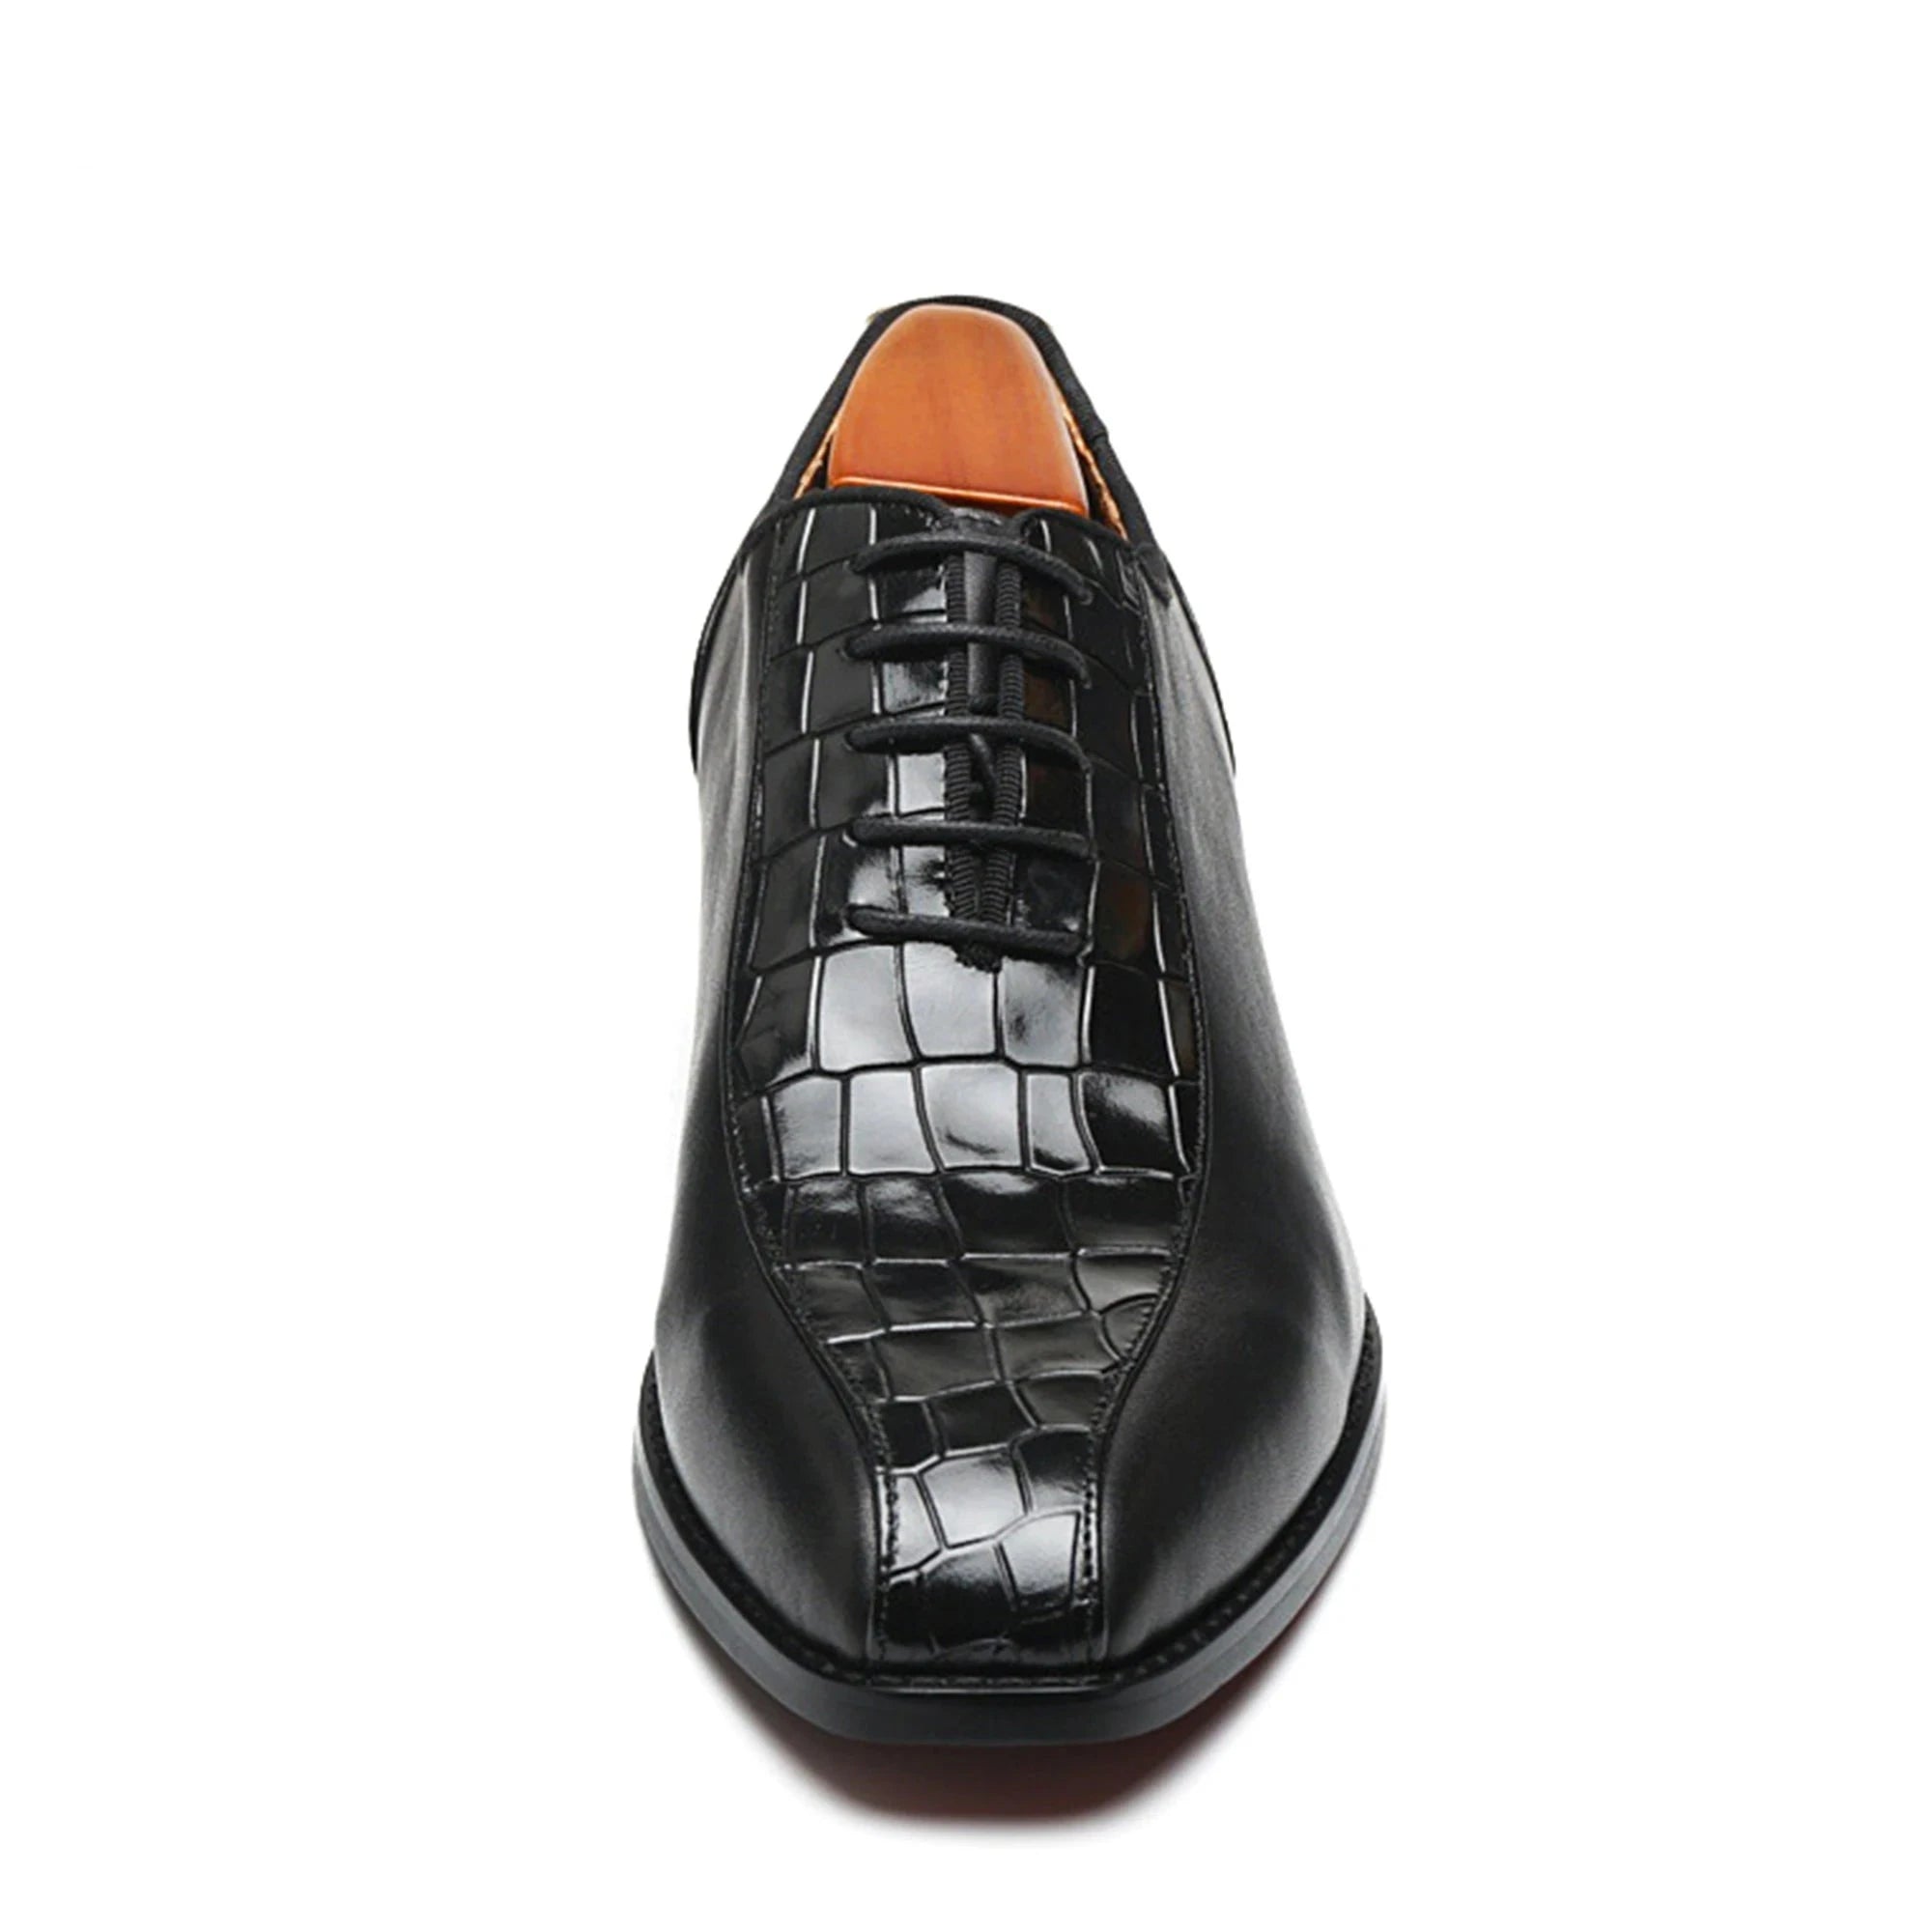 The Luxxor - Red bottom sole leather oxford dress shoes with half alligator print